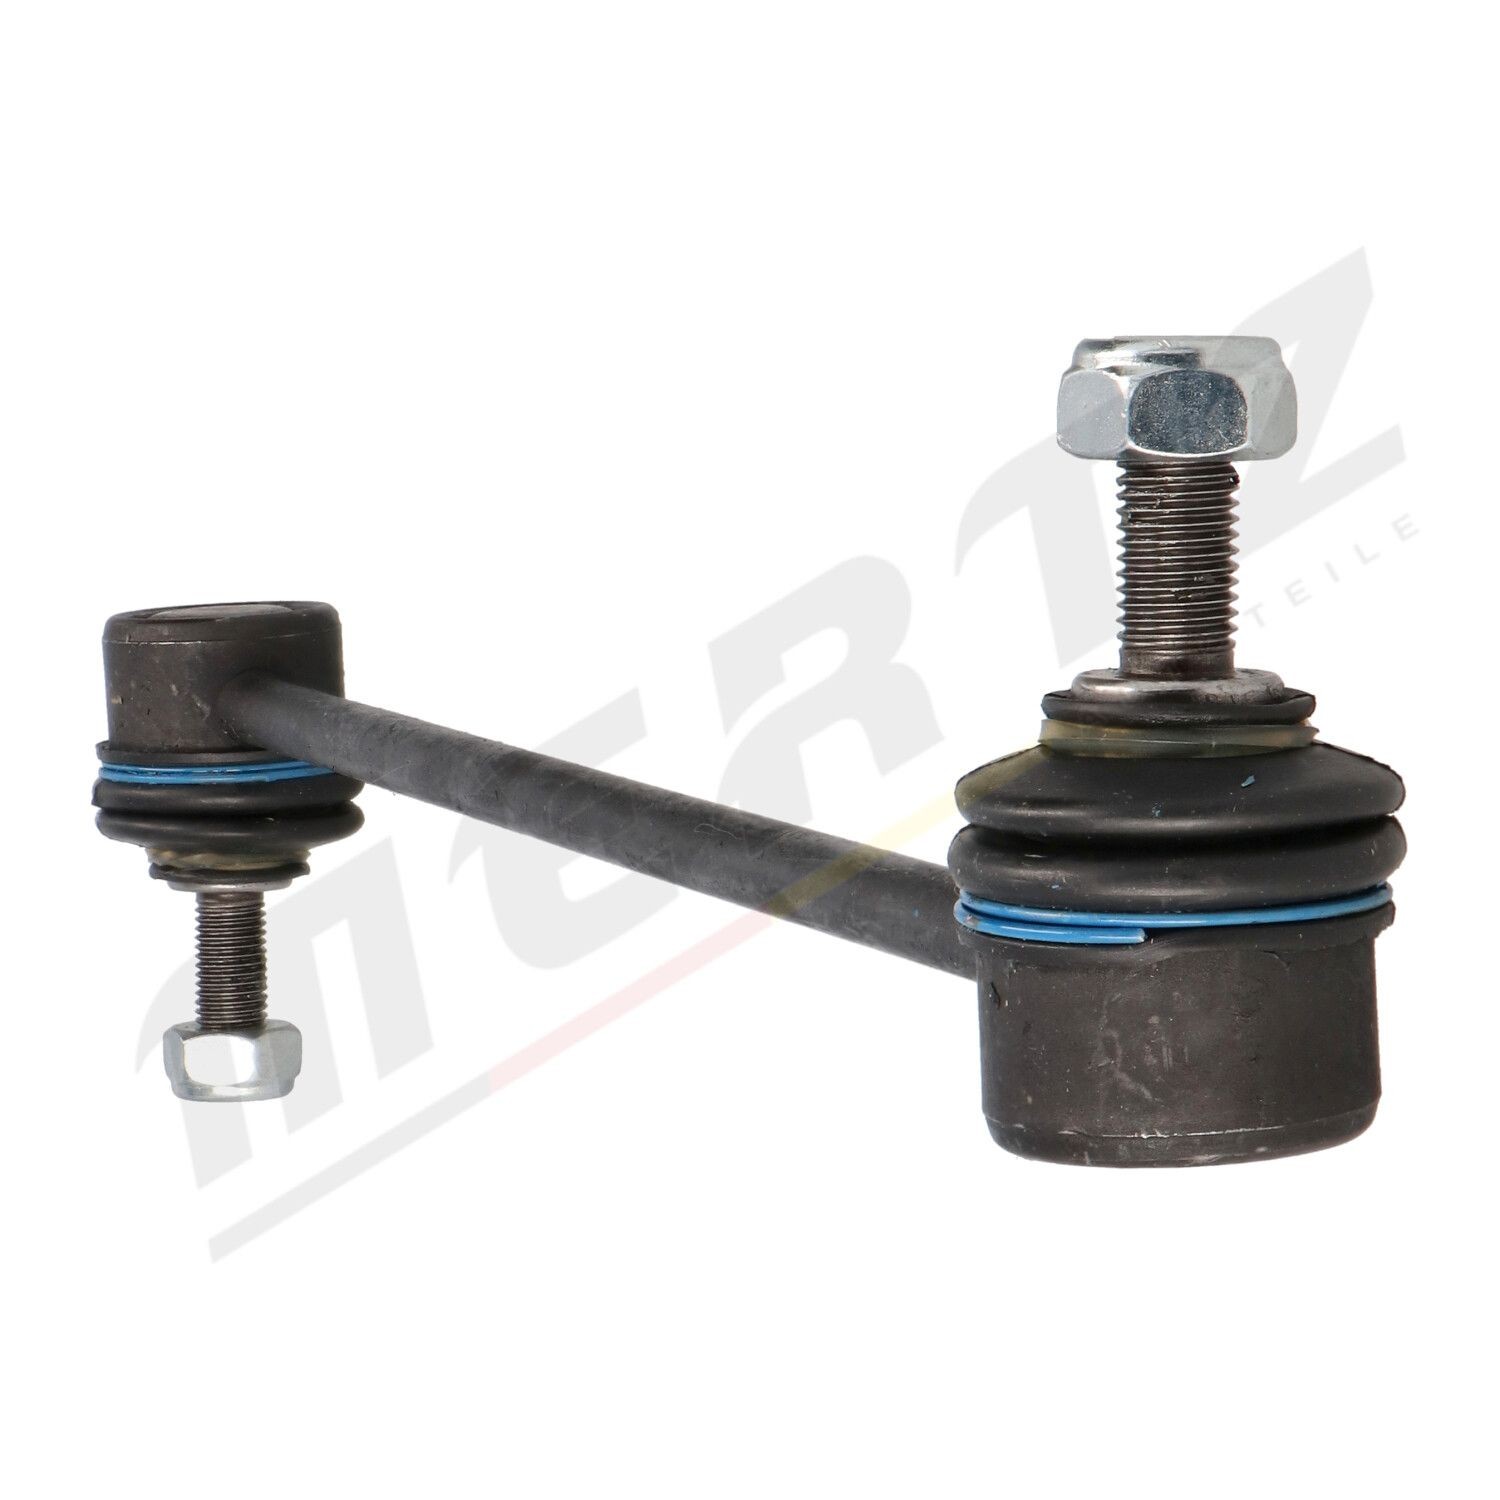 MS0453 Anti-roll bar links MERTZ M-S0453 review and test